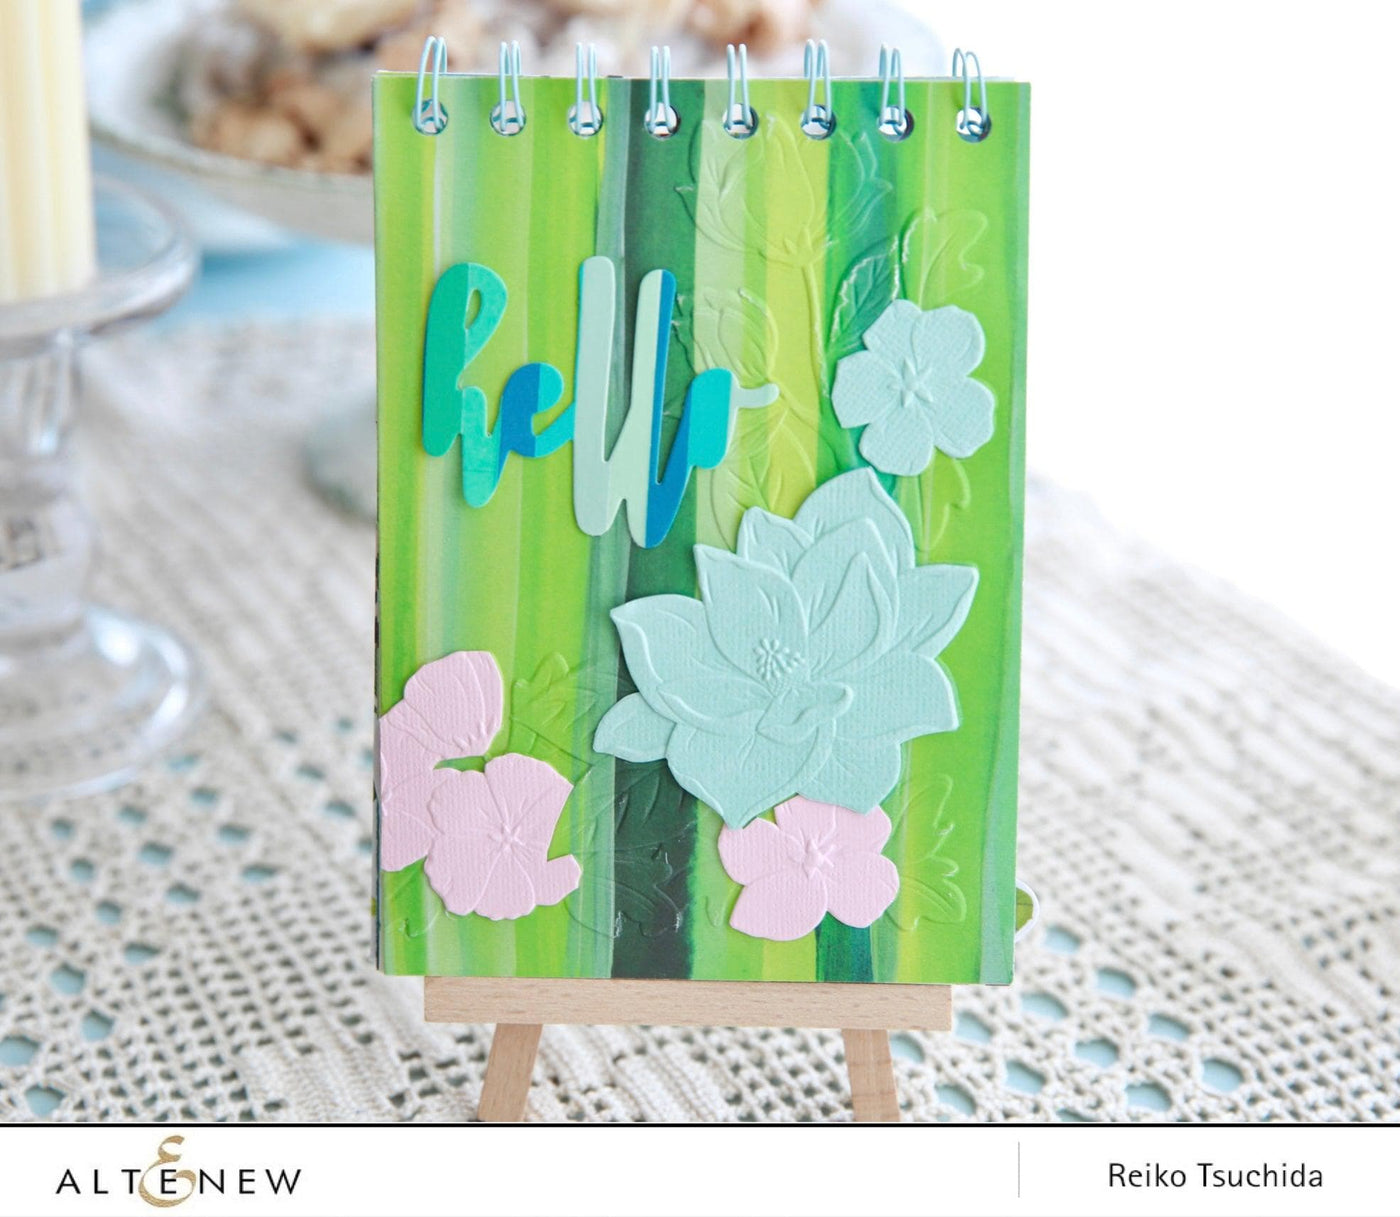 Altenew Craft Your Life Project Kit Craft Your Life Project Kit: Magnolia & Blooms